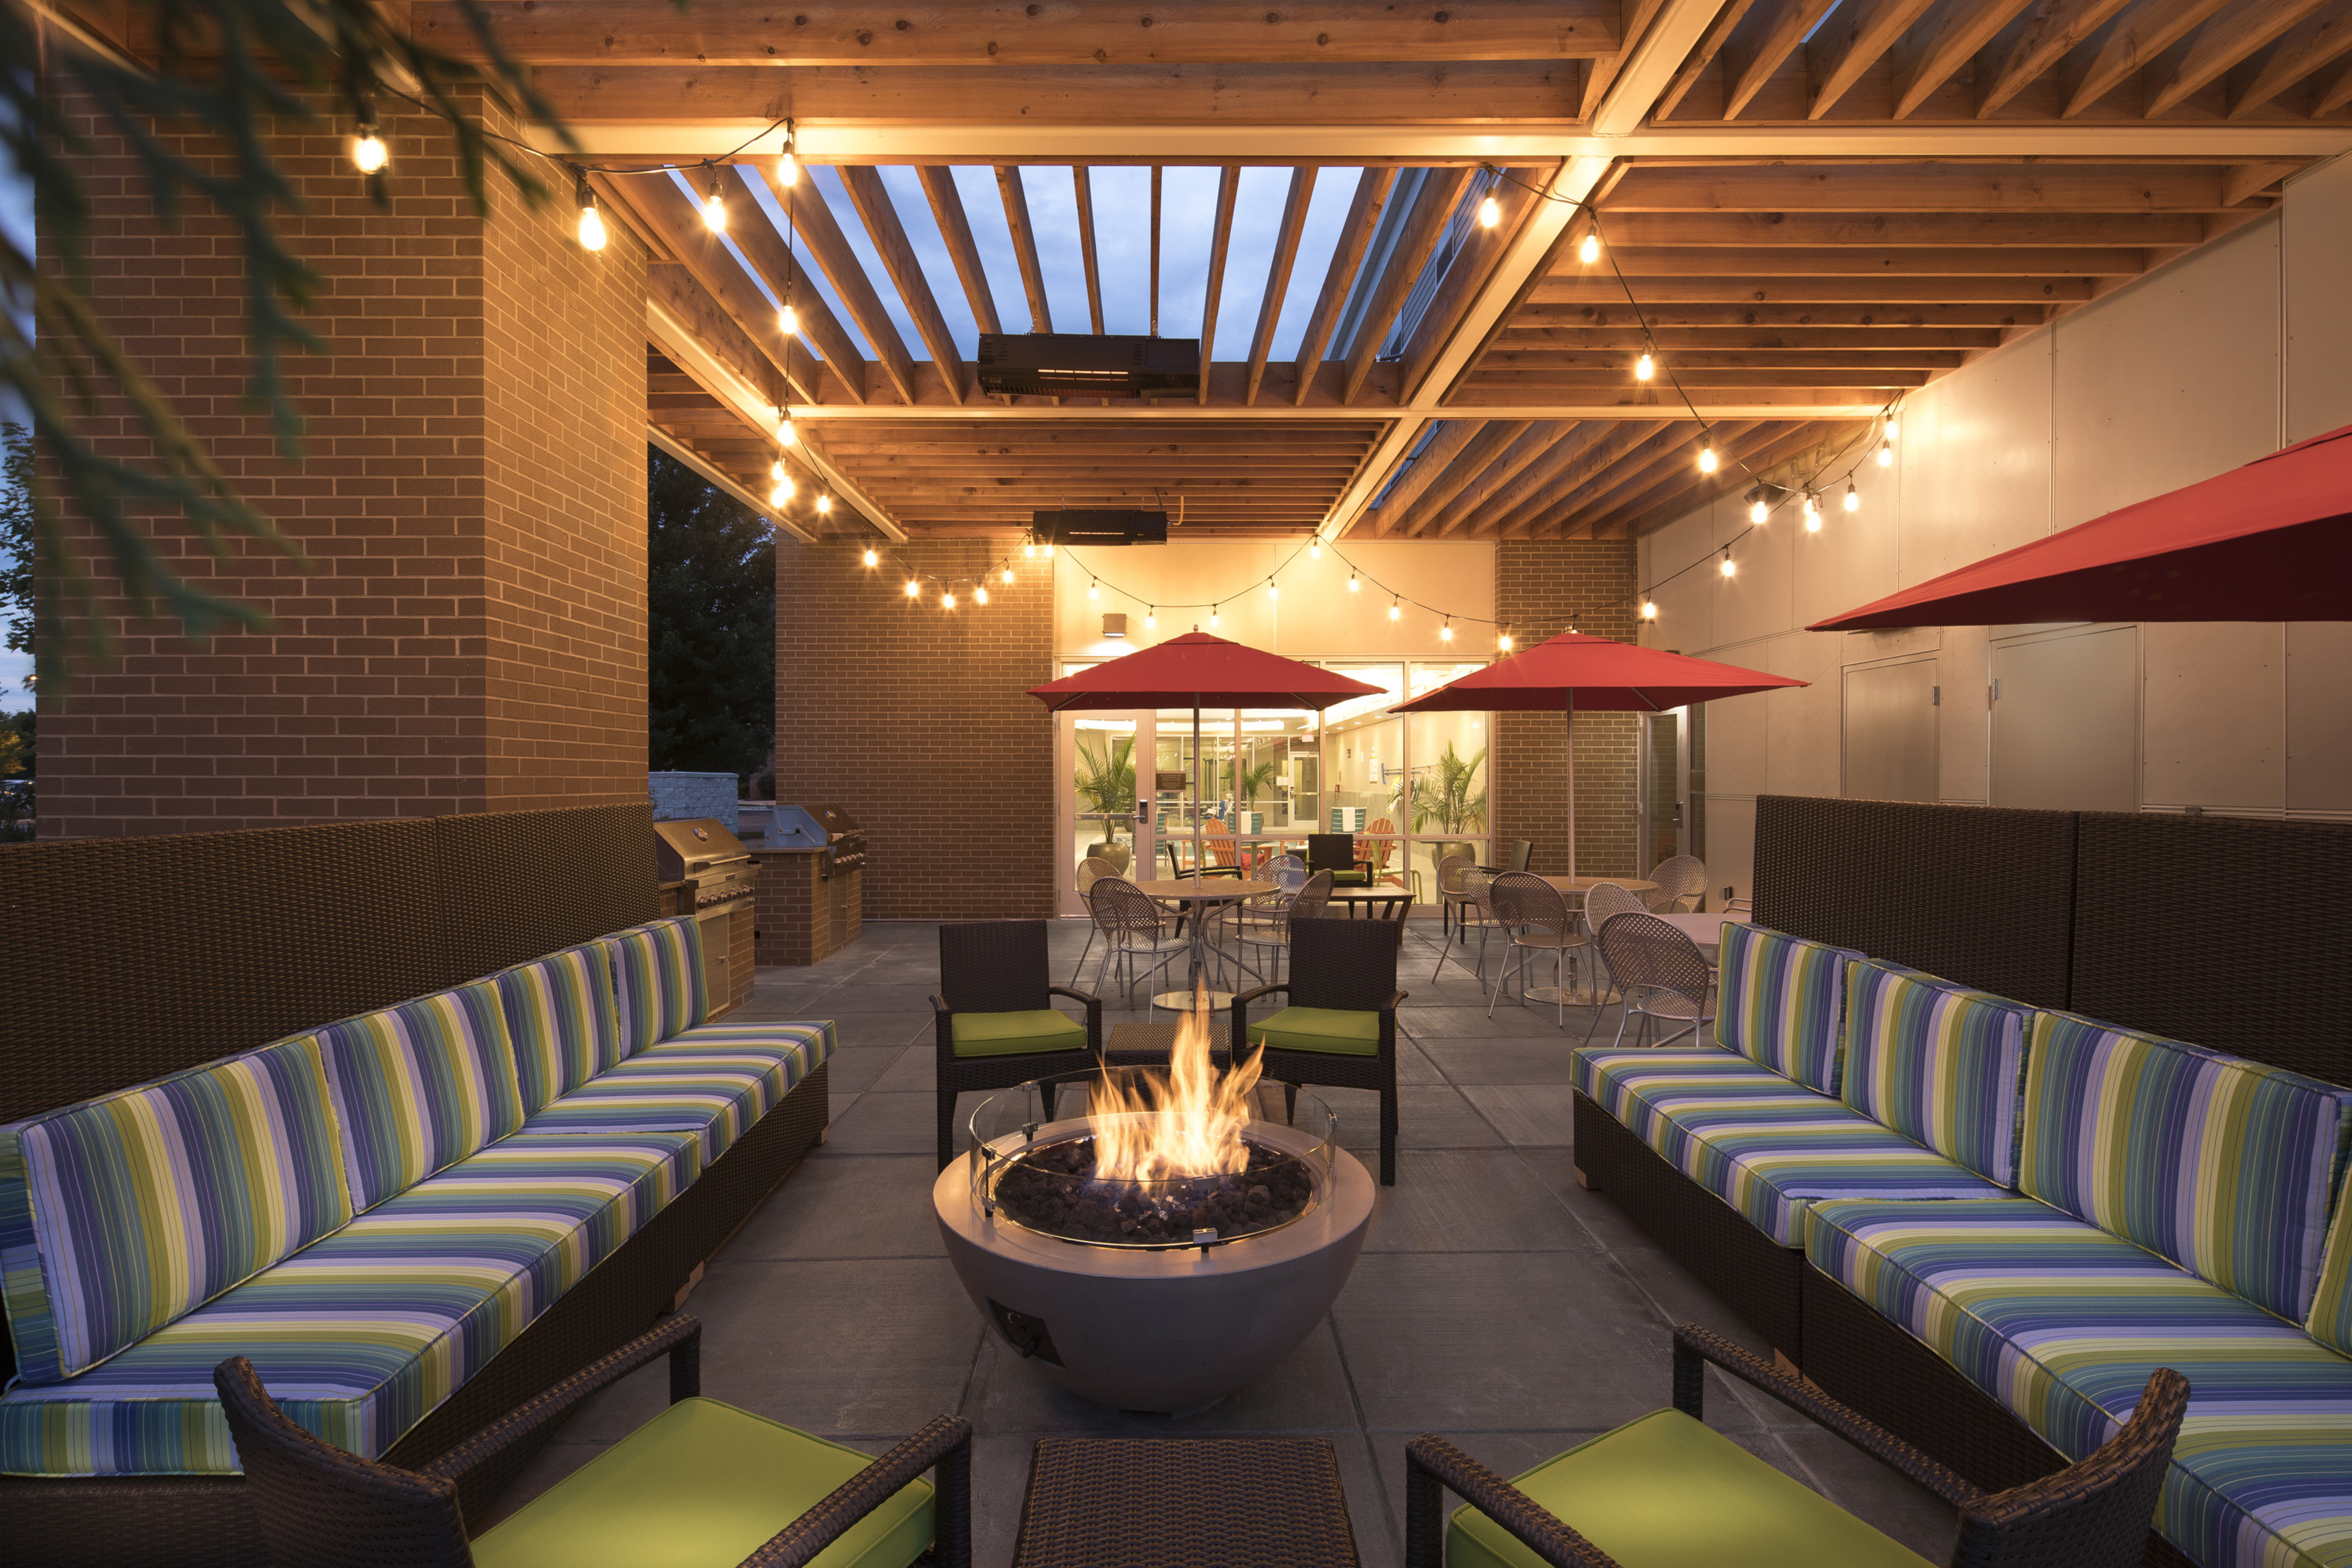 Outdoor patio area lit up with sofas and lounge chairs surrounding fire pit, and tables with umbrella covers